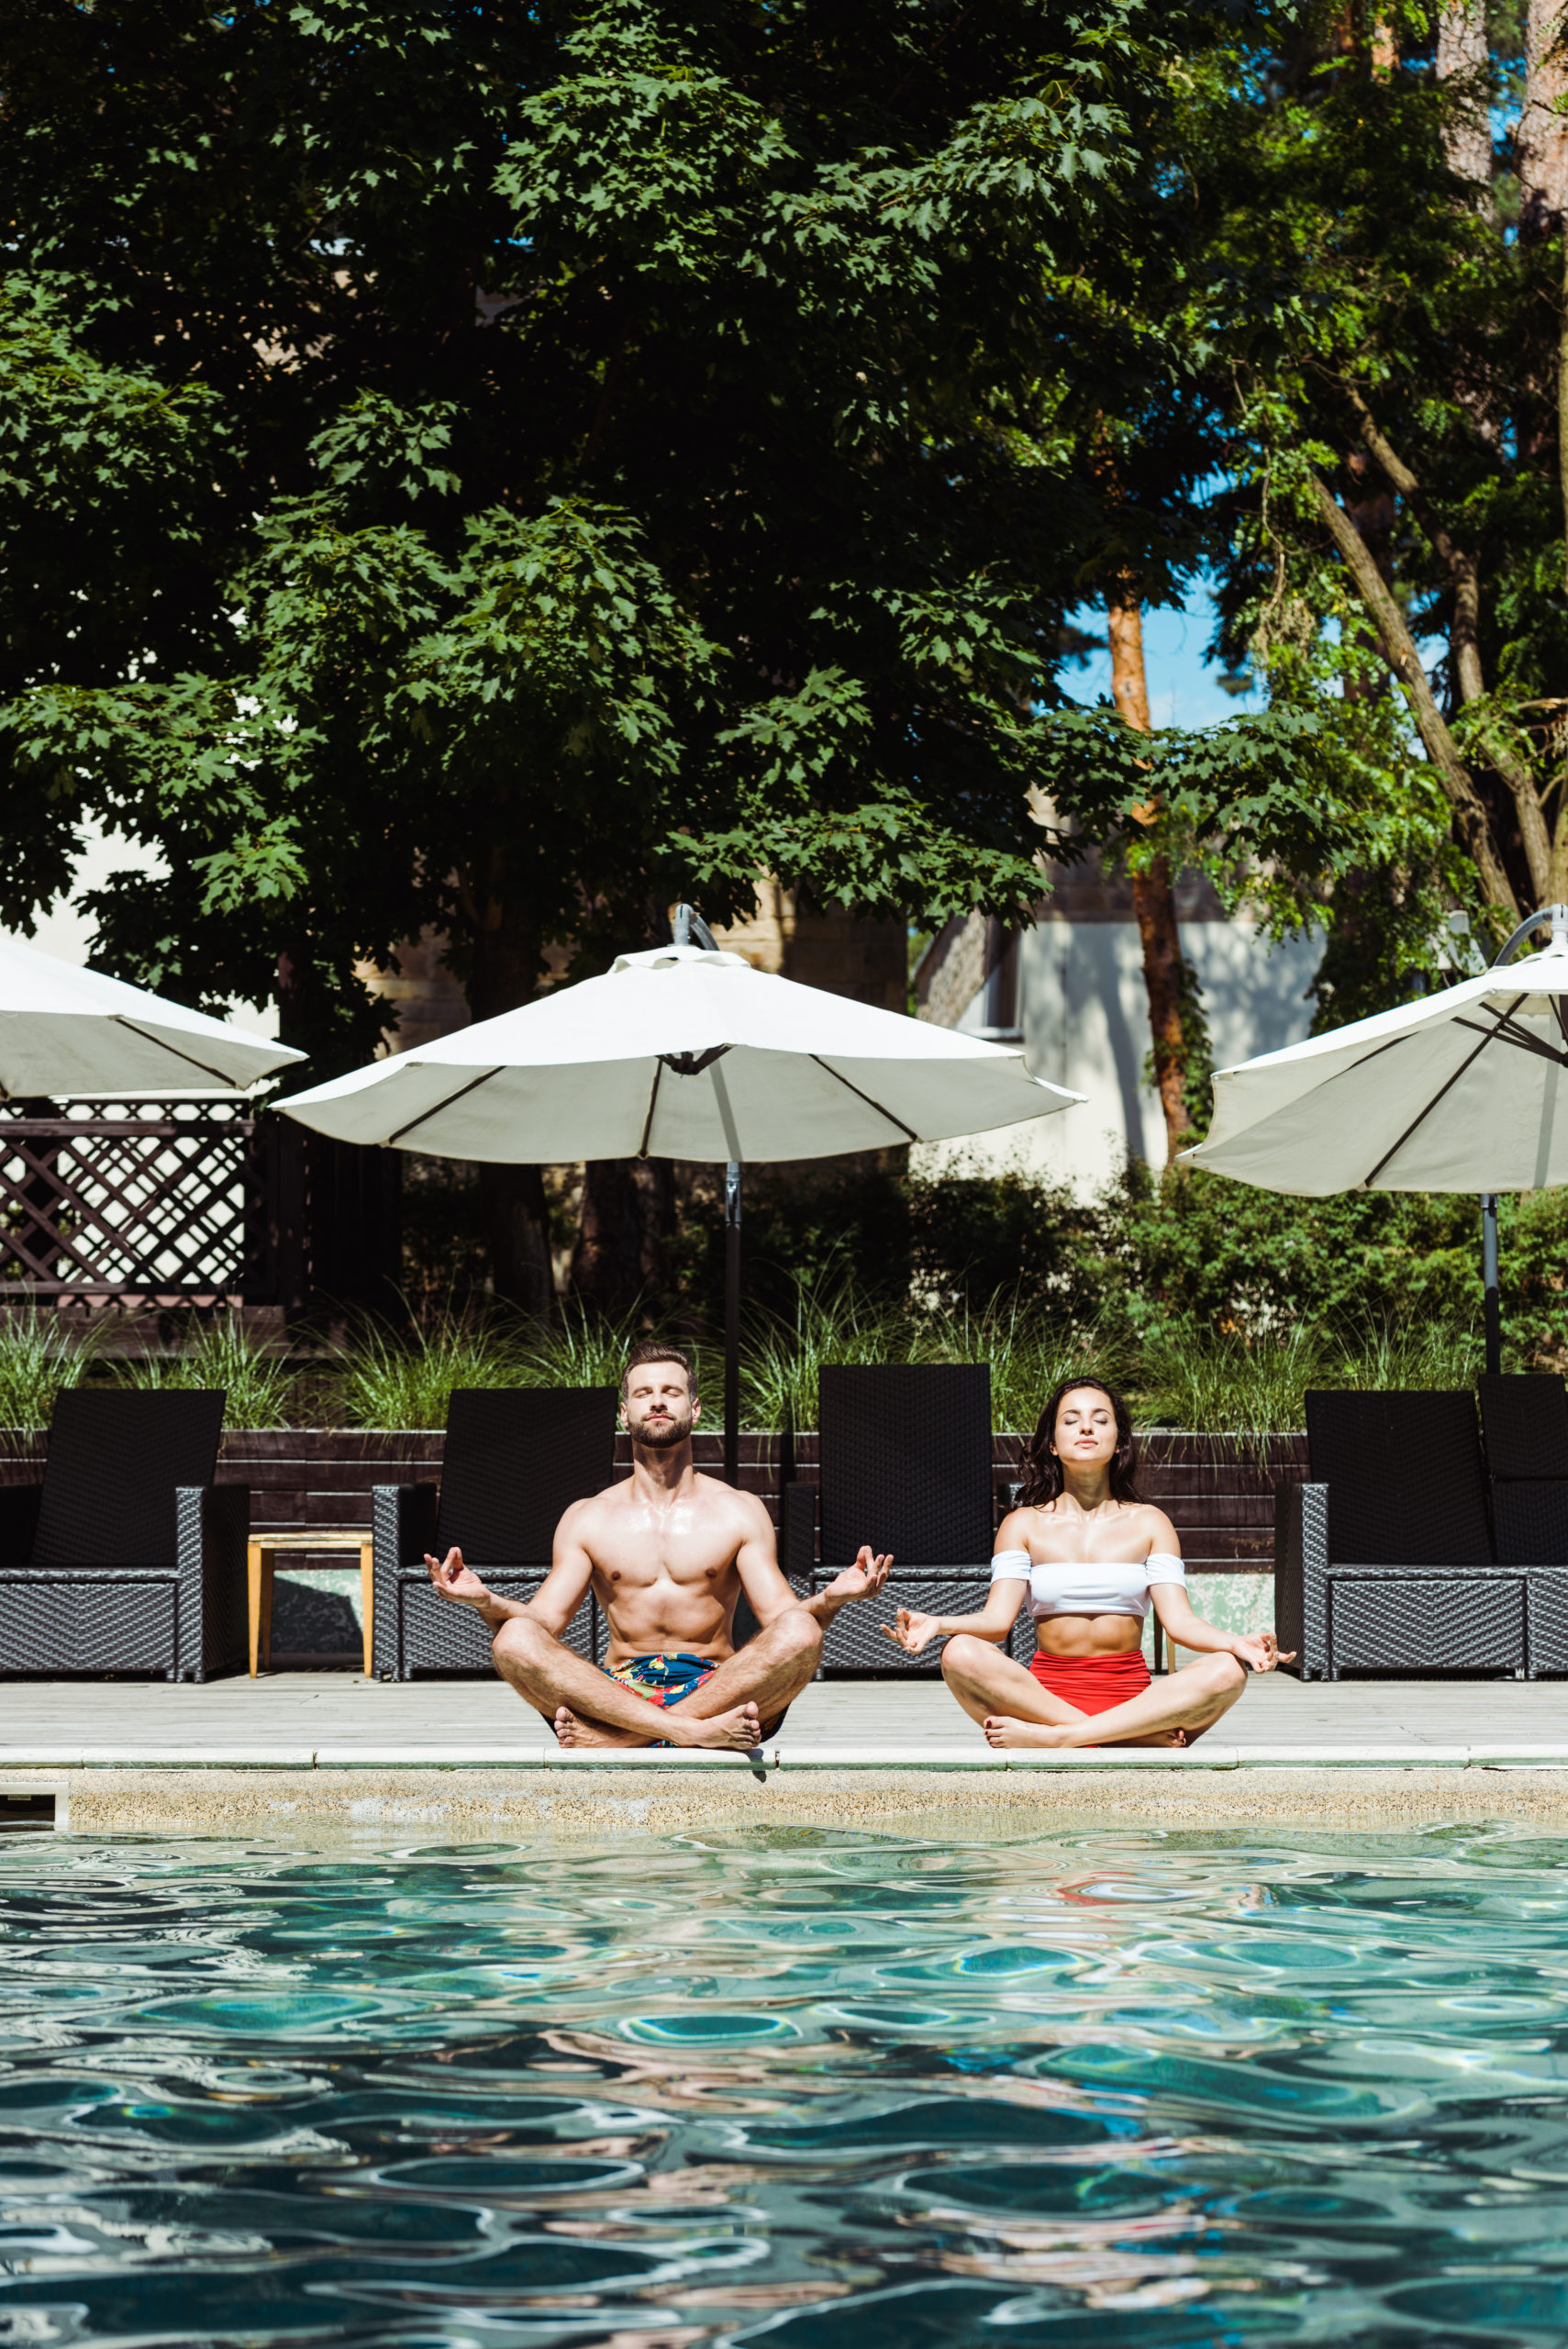 A man and a woman practicing yoga at the edge of the pool, combining relaxation and fitness in a serene poolside setting.